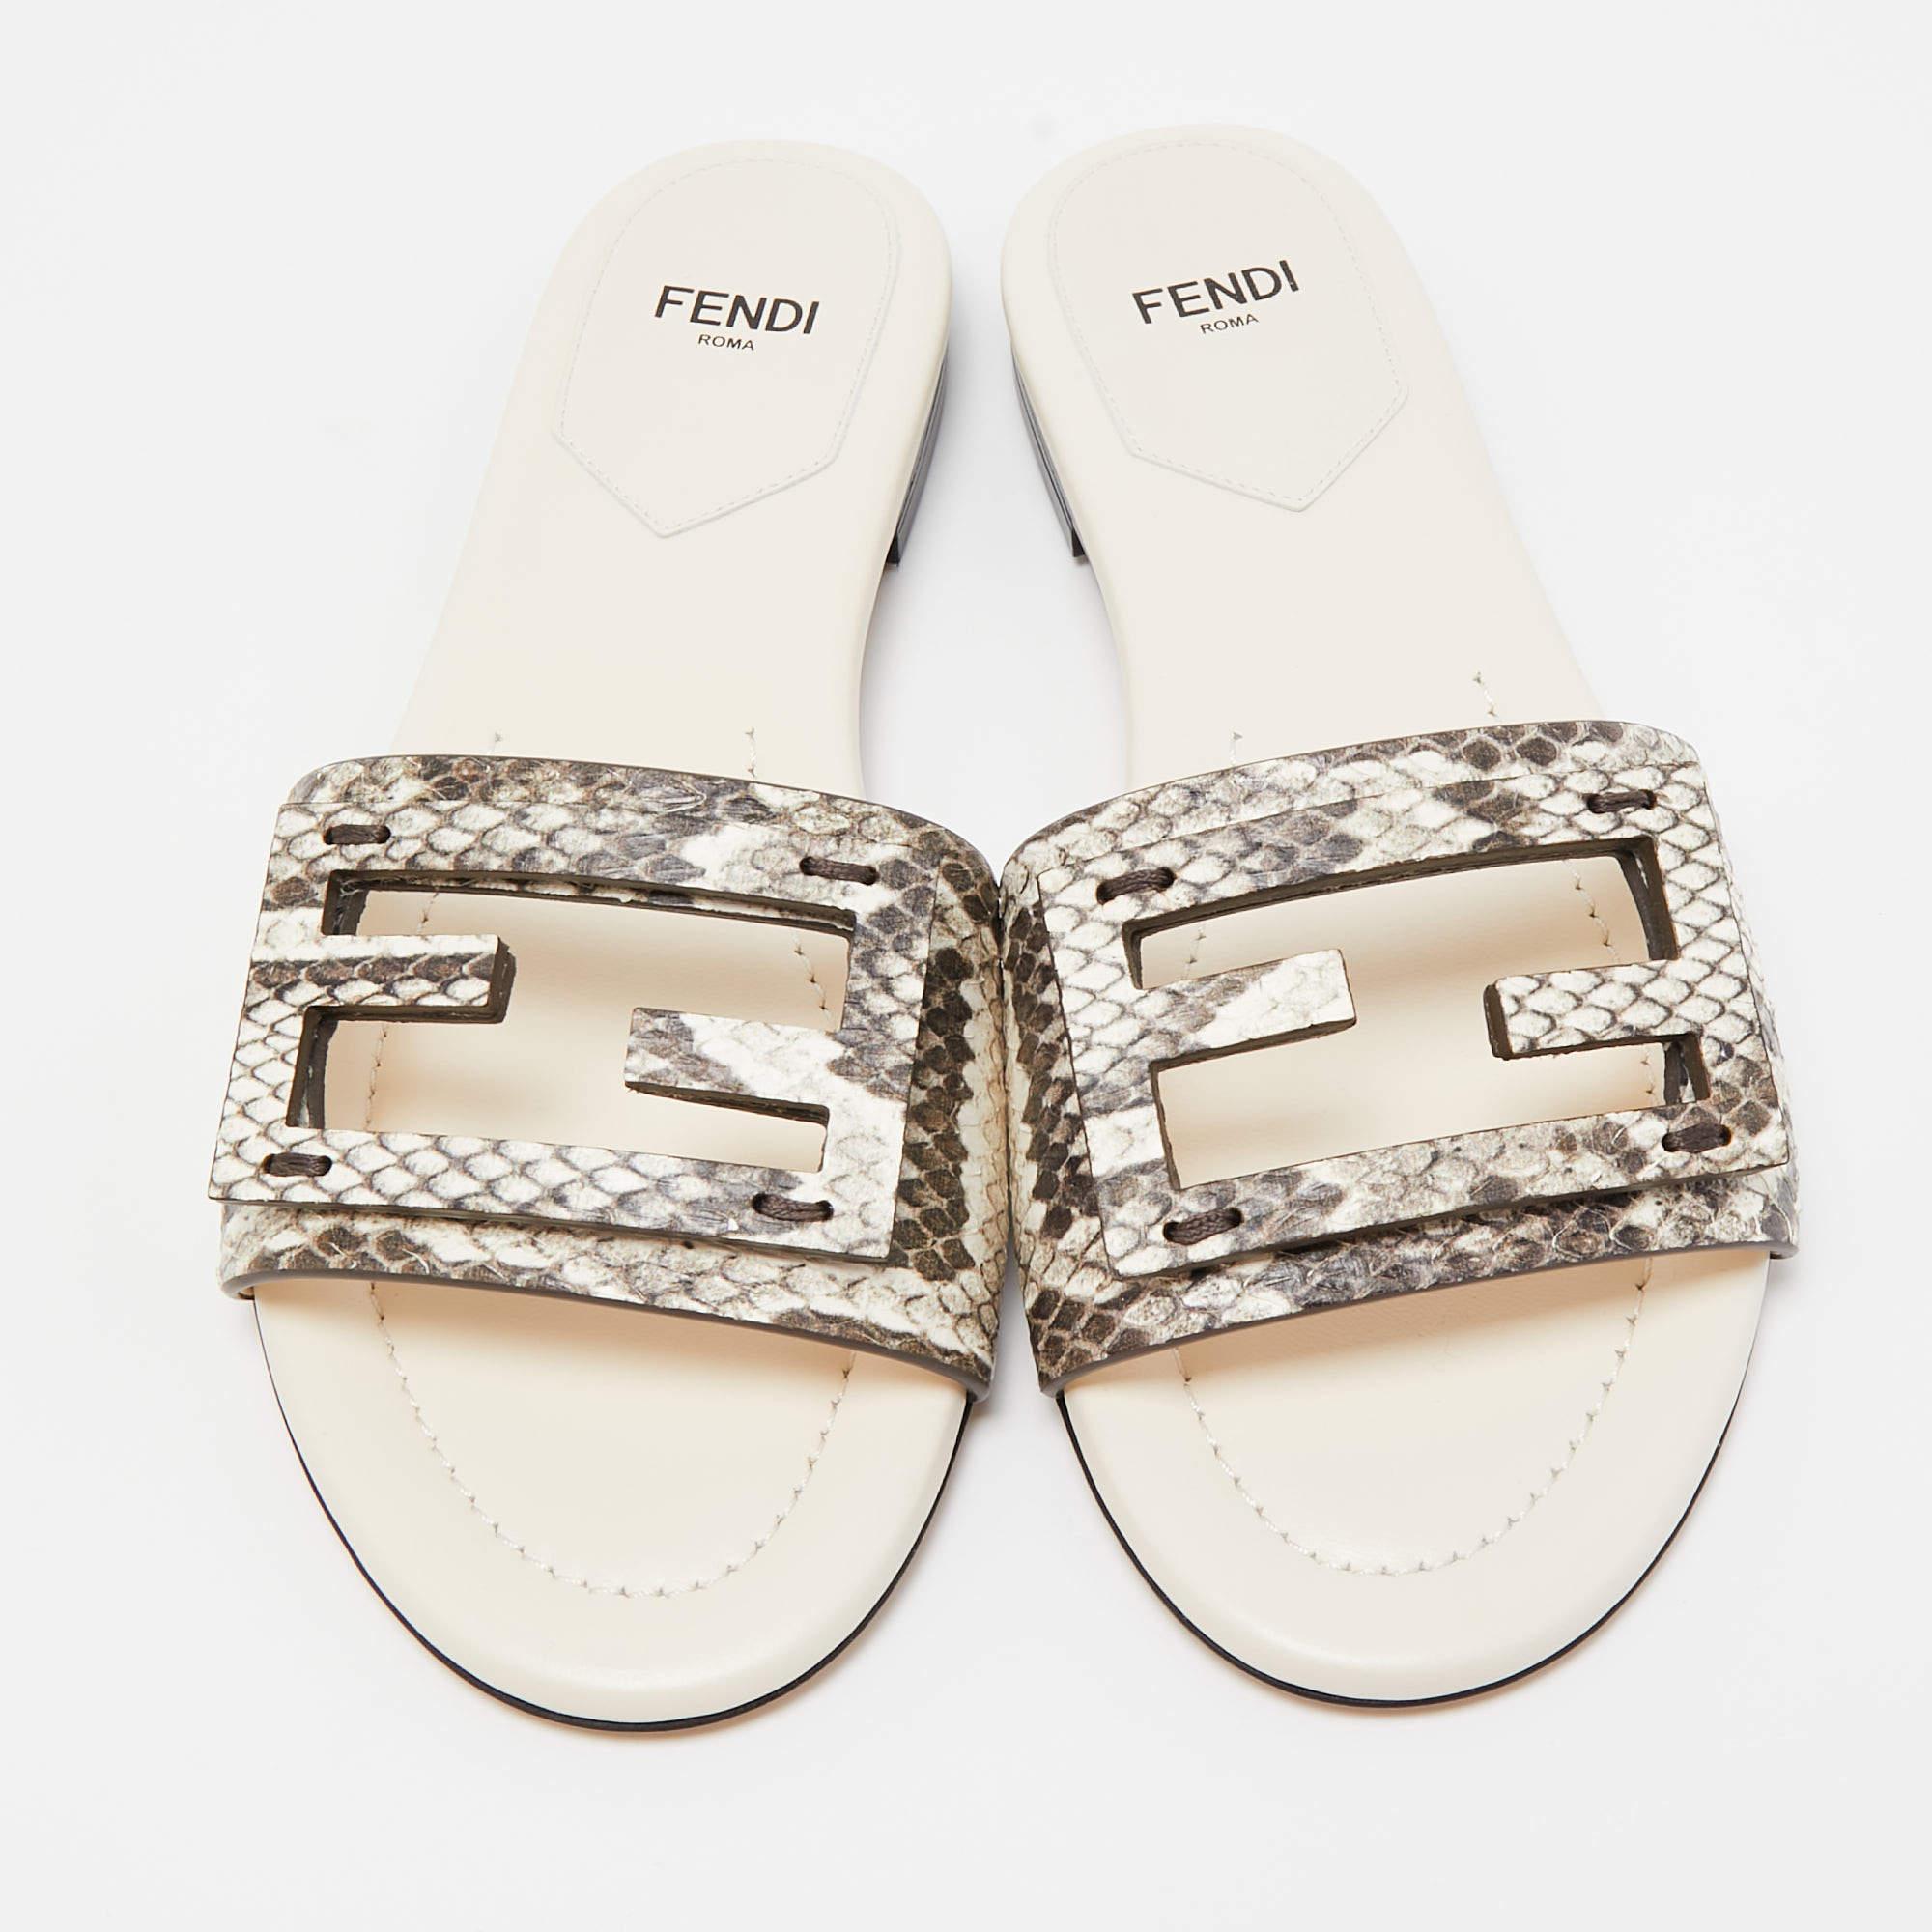 Frame your feet with these Fendi flat slides. Created using the best materials, the flats are perfect with short, midi, and maxi hemlines.

Includes: Original Dustbag, Original Box, Info Booklet